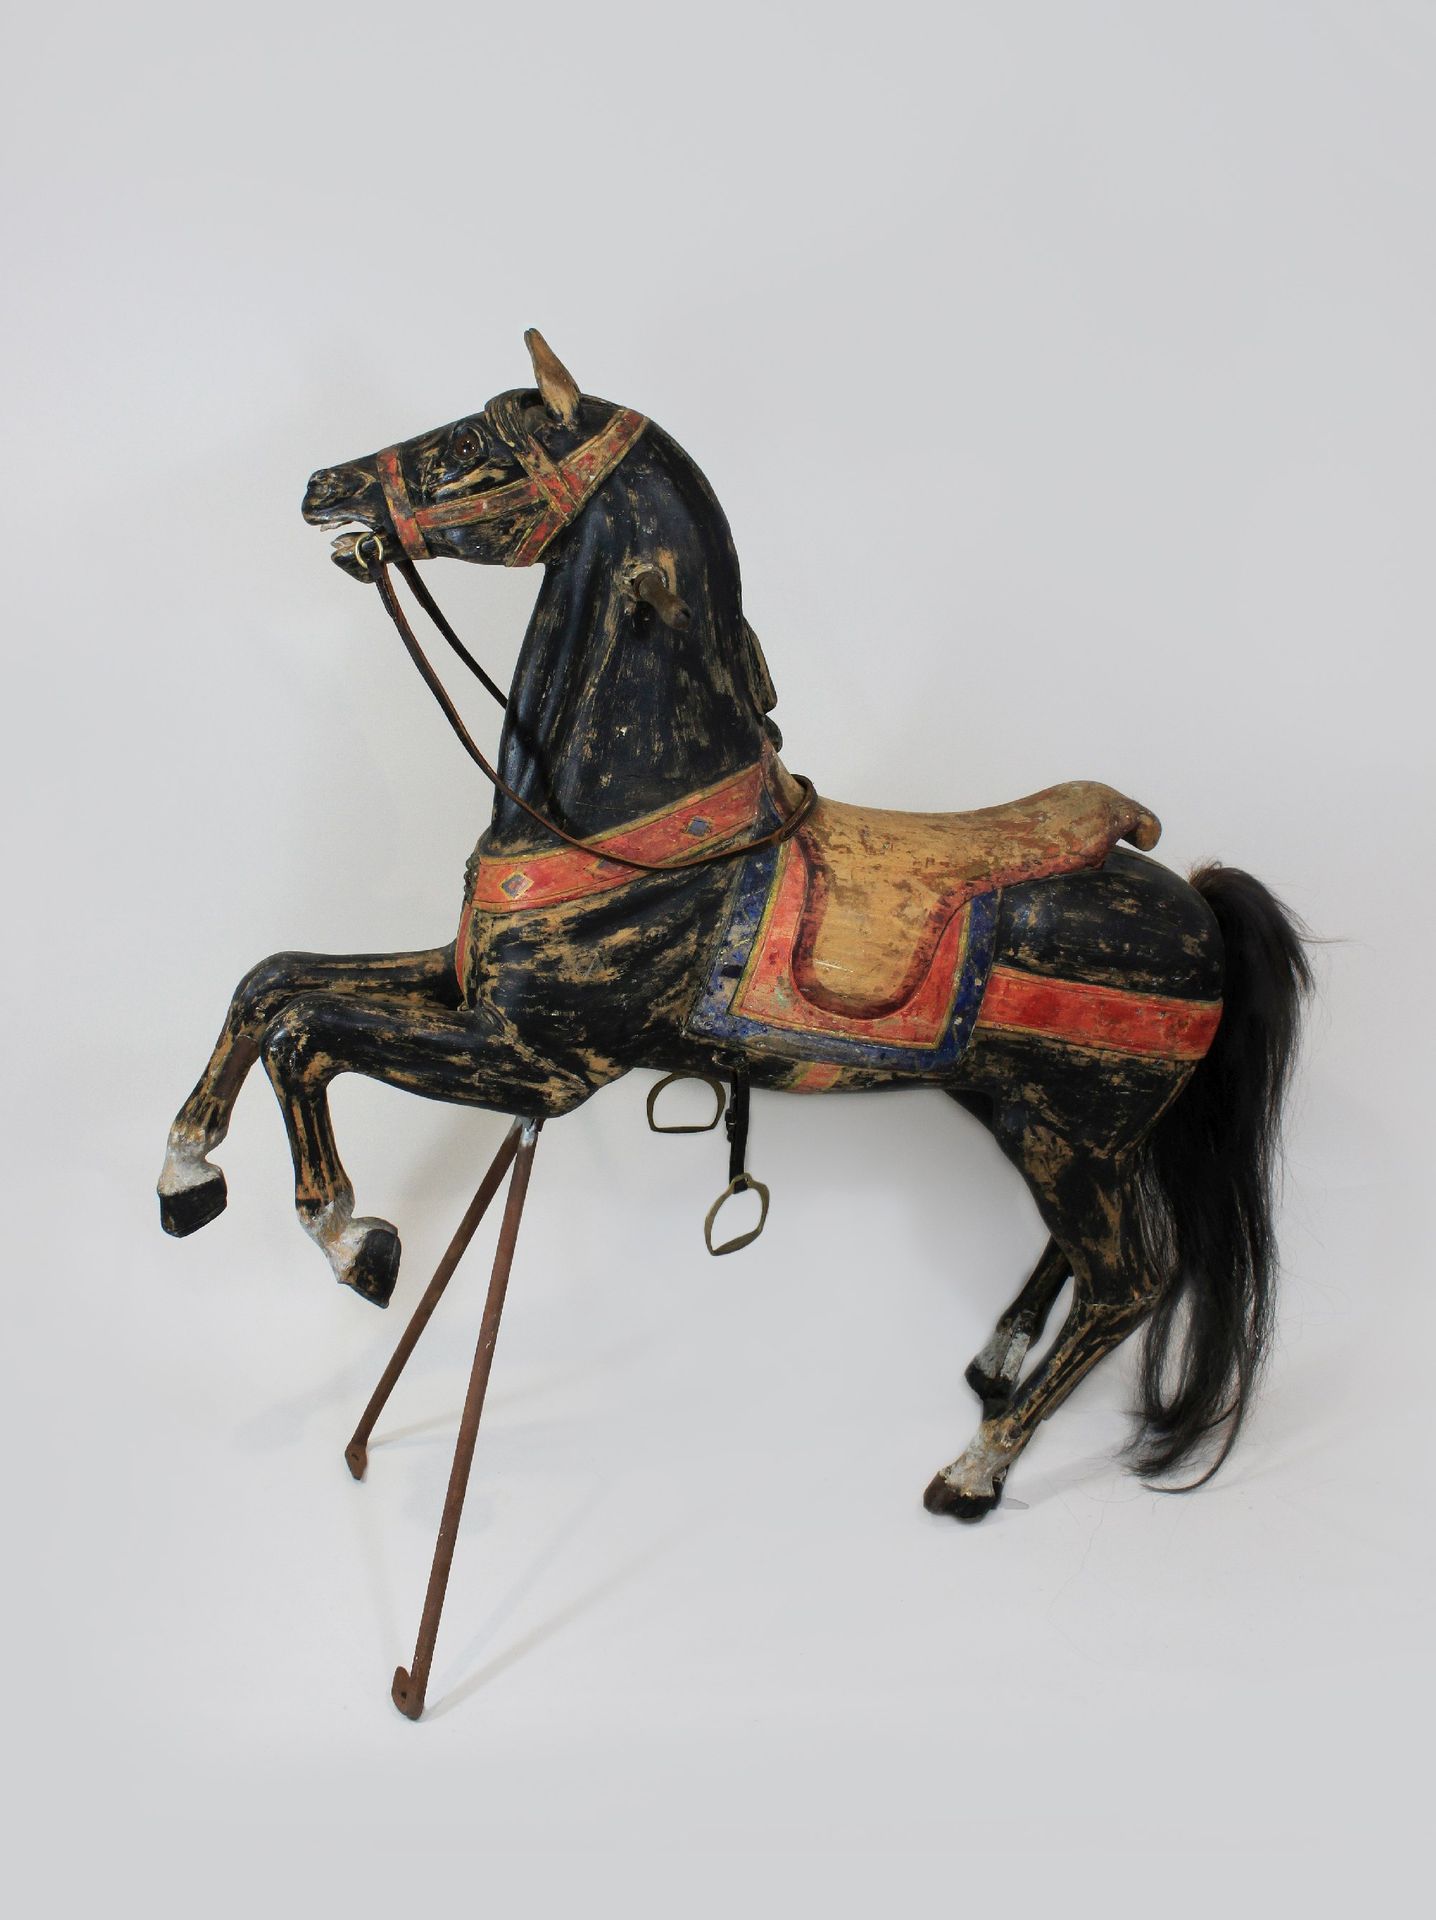 Karussellpferd, Holz Carousel horse, wood, polychrome painted, tail made of hors&hellip;